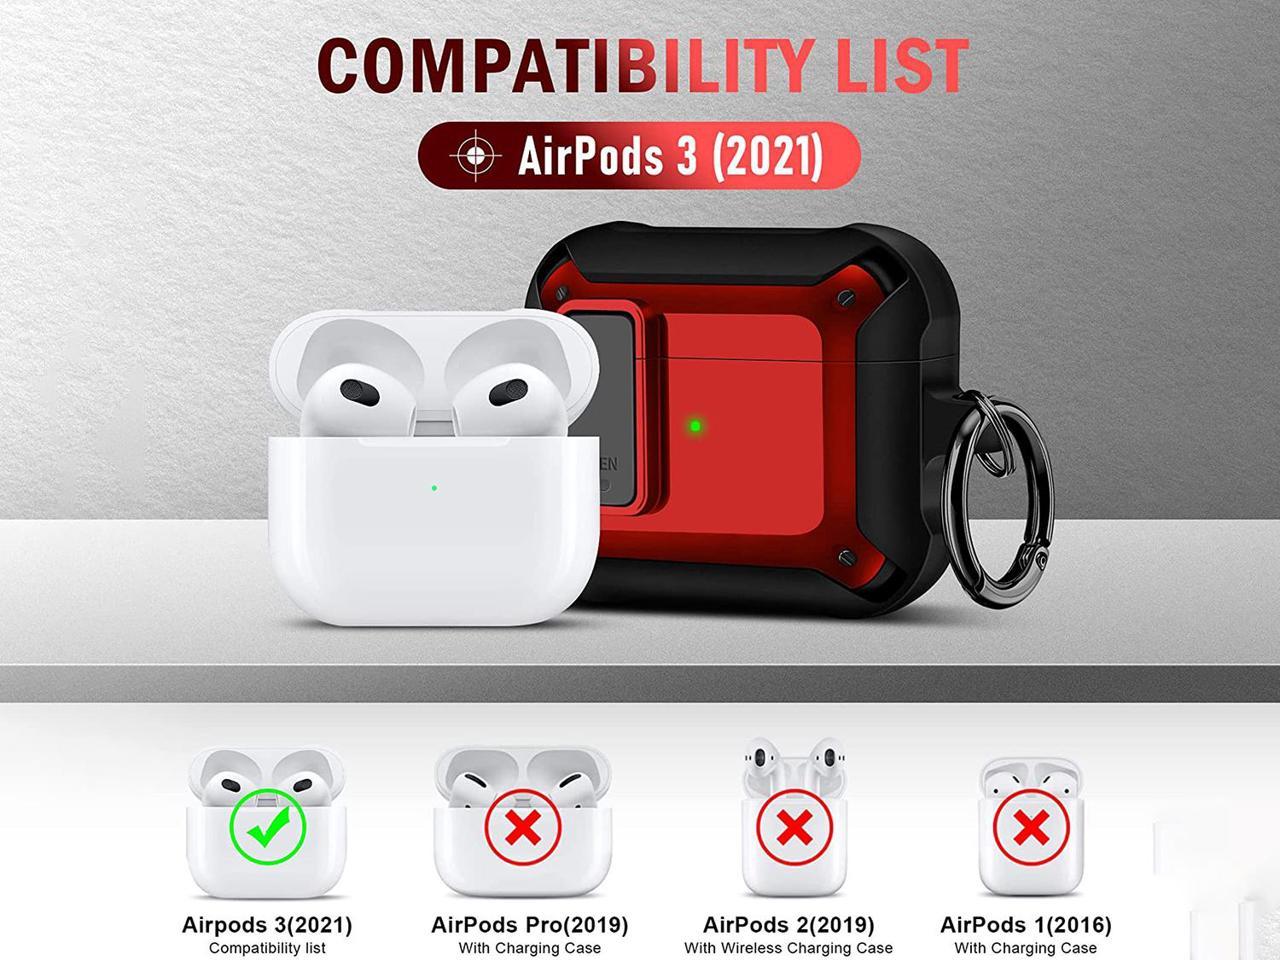 Rome Care Case For AirPods 3rd Generation 2021 With Secure Lock Clip Apple AirPods 3 Cover Military Armor Series Full-Body Rugged Shell for Men Women with Keychain, Wireless Charging